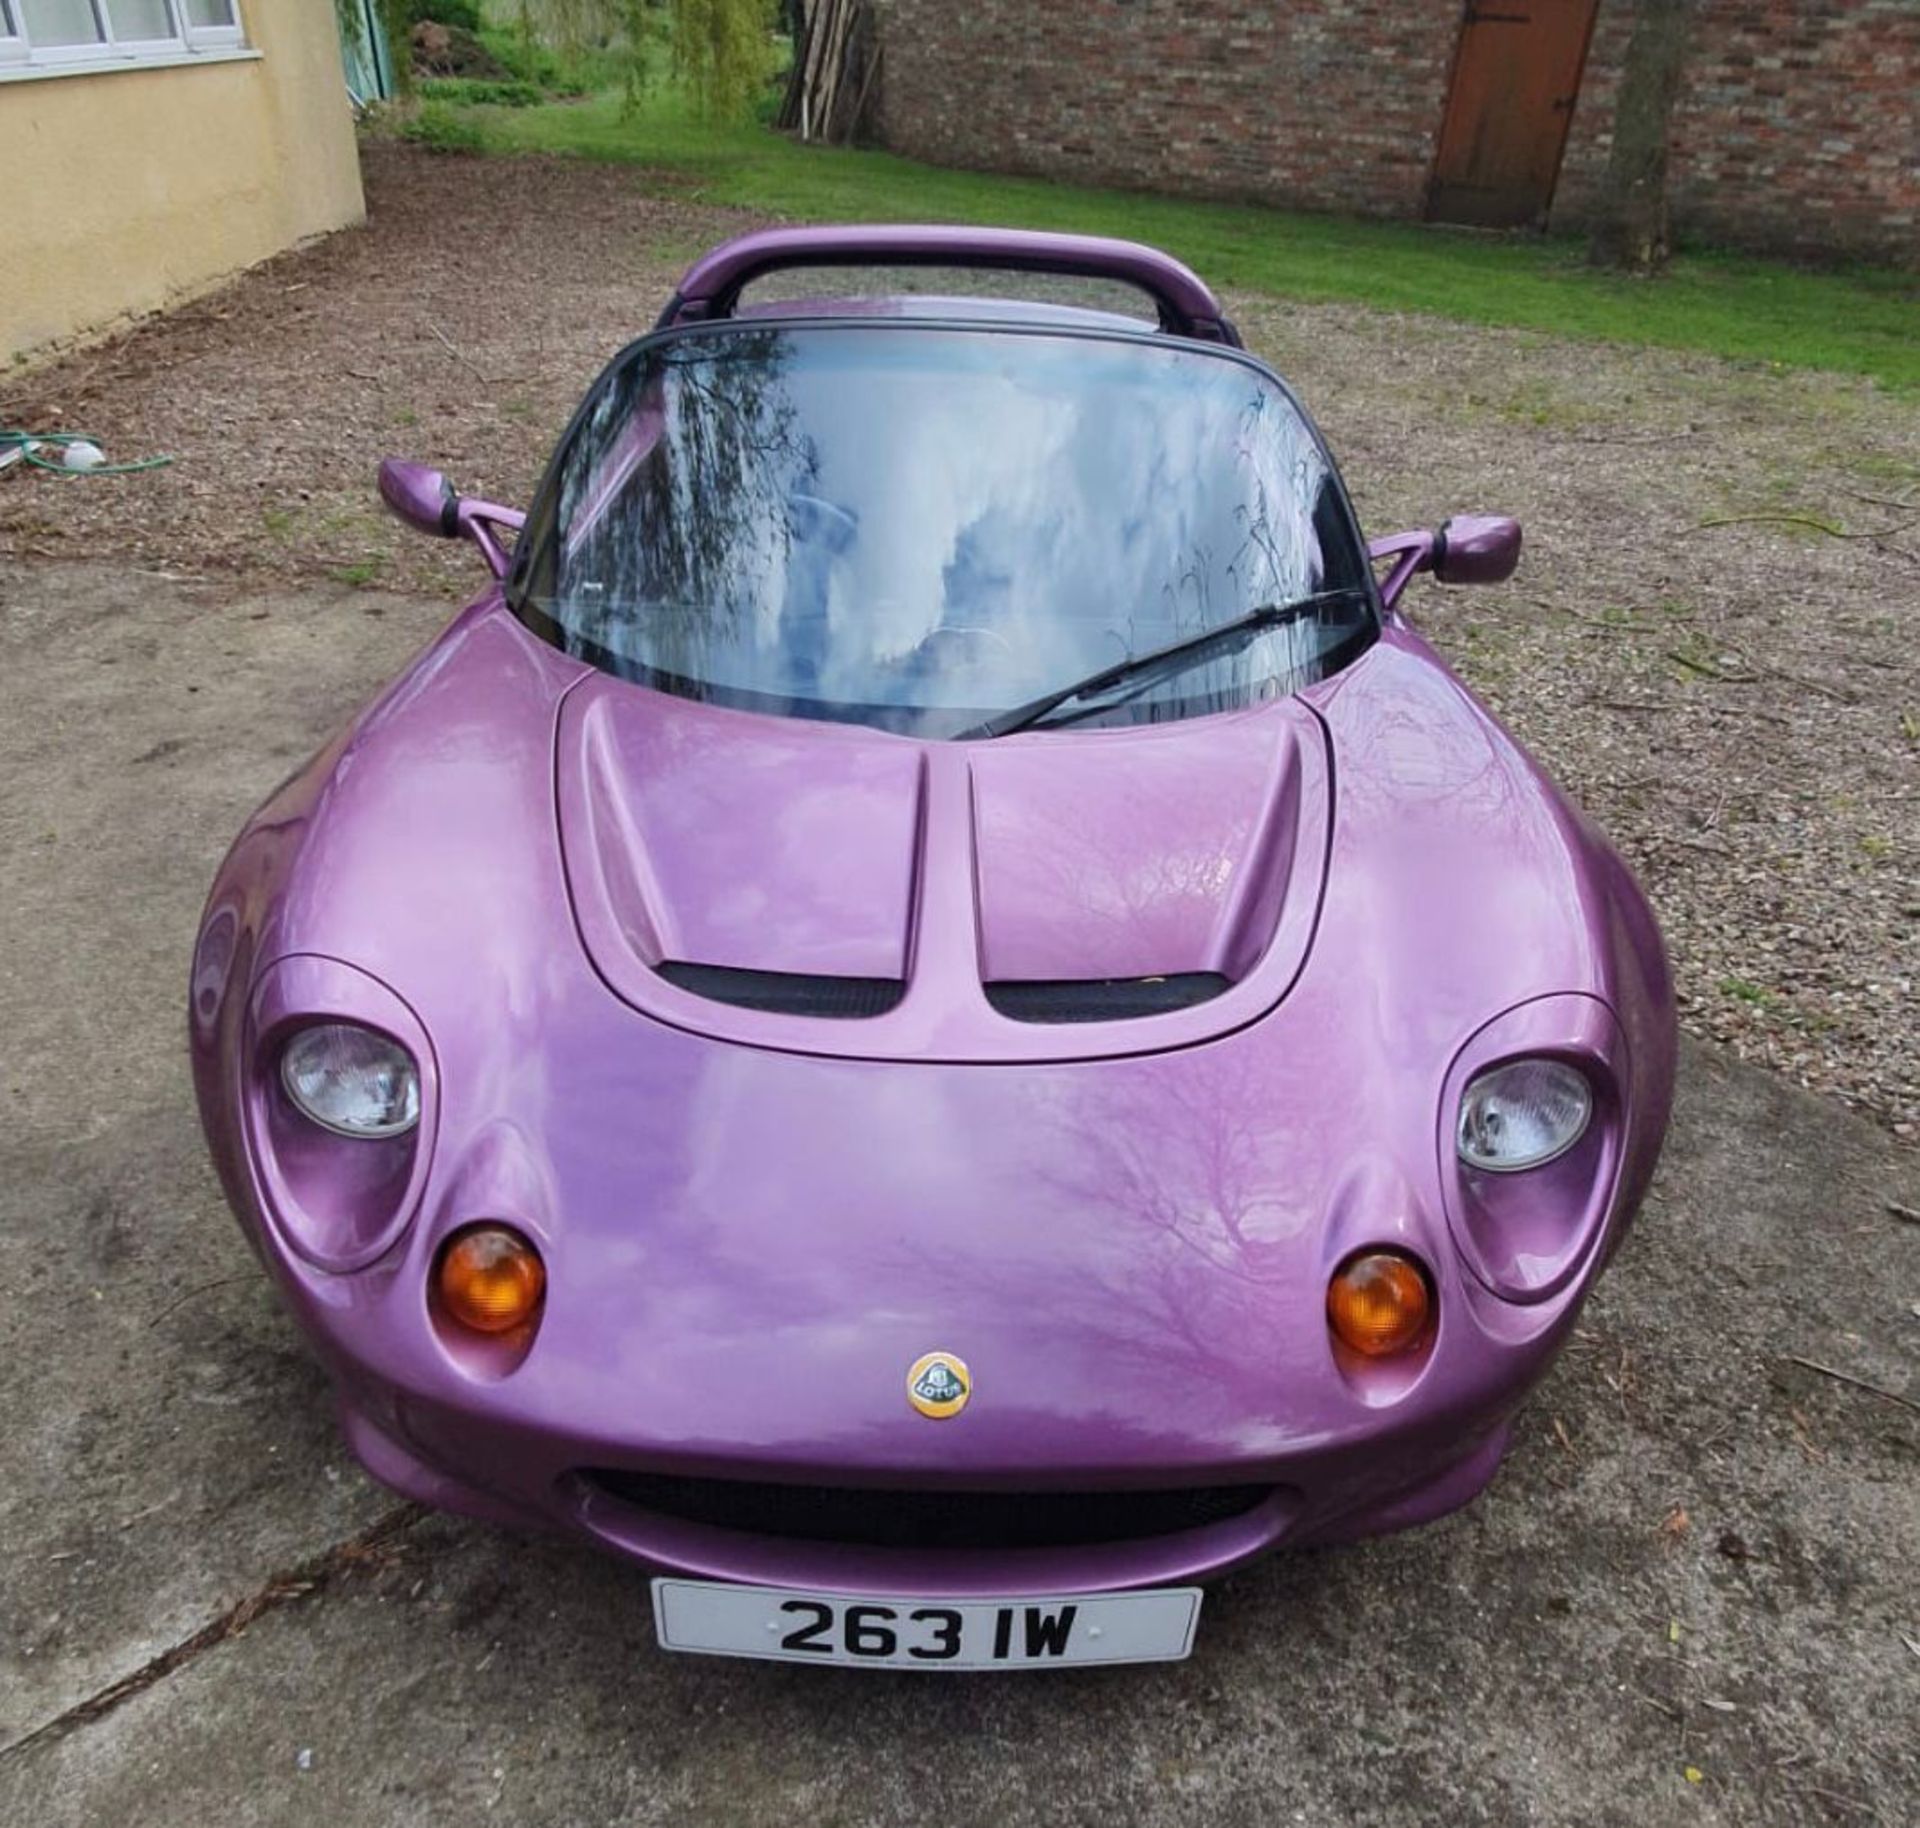 1998 Lotus Elise with mileage of 6,802 in one-off factory painted colour - Image 3 of 8